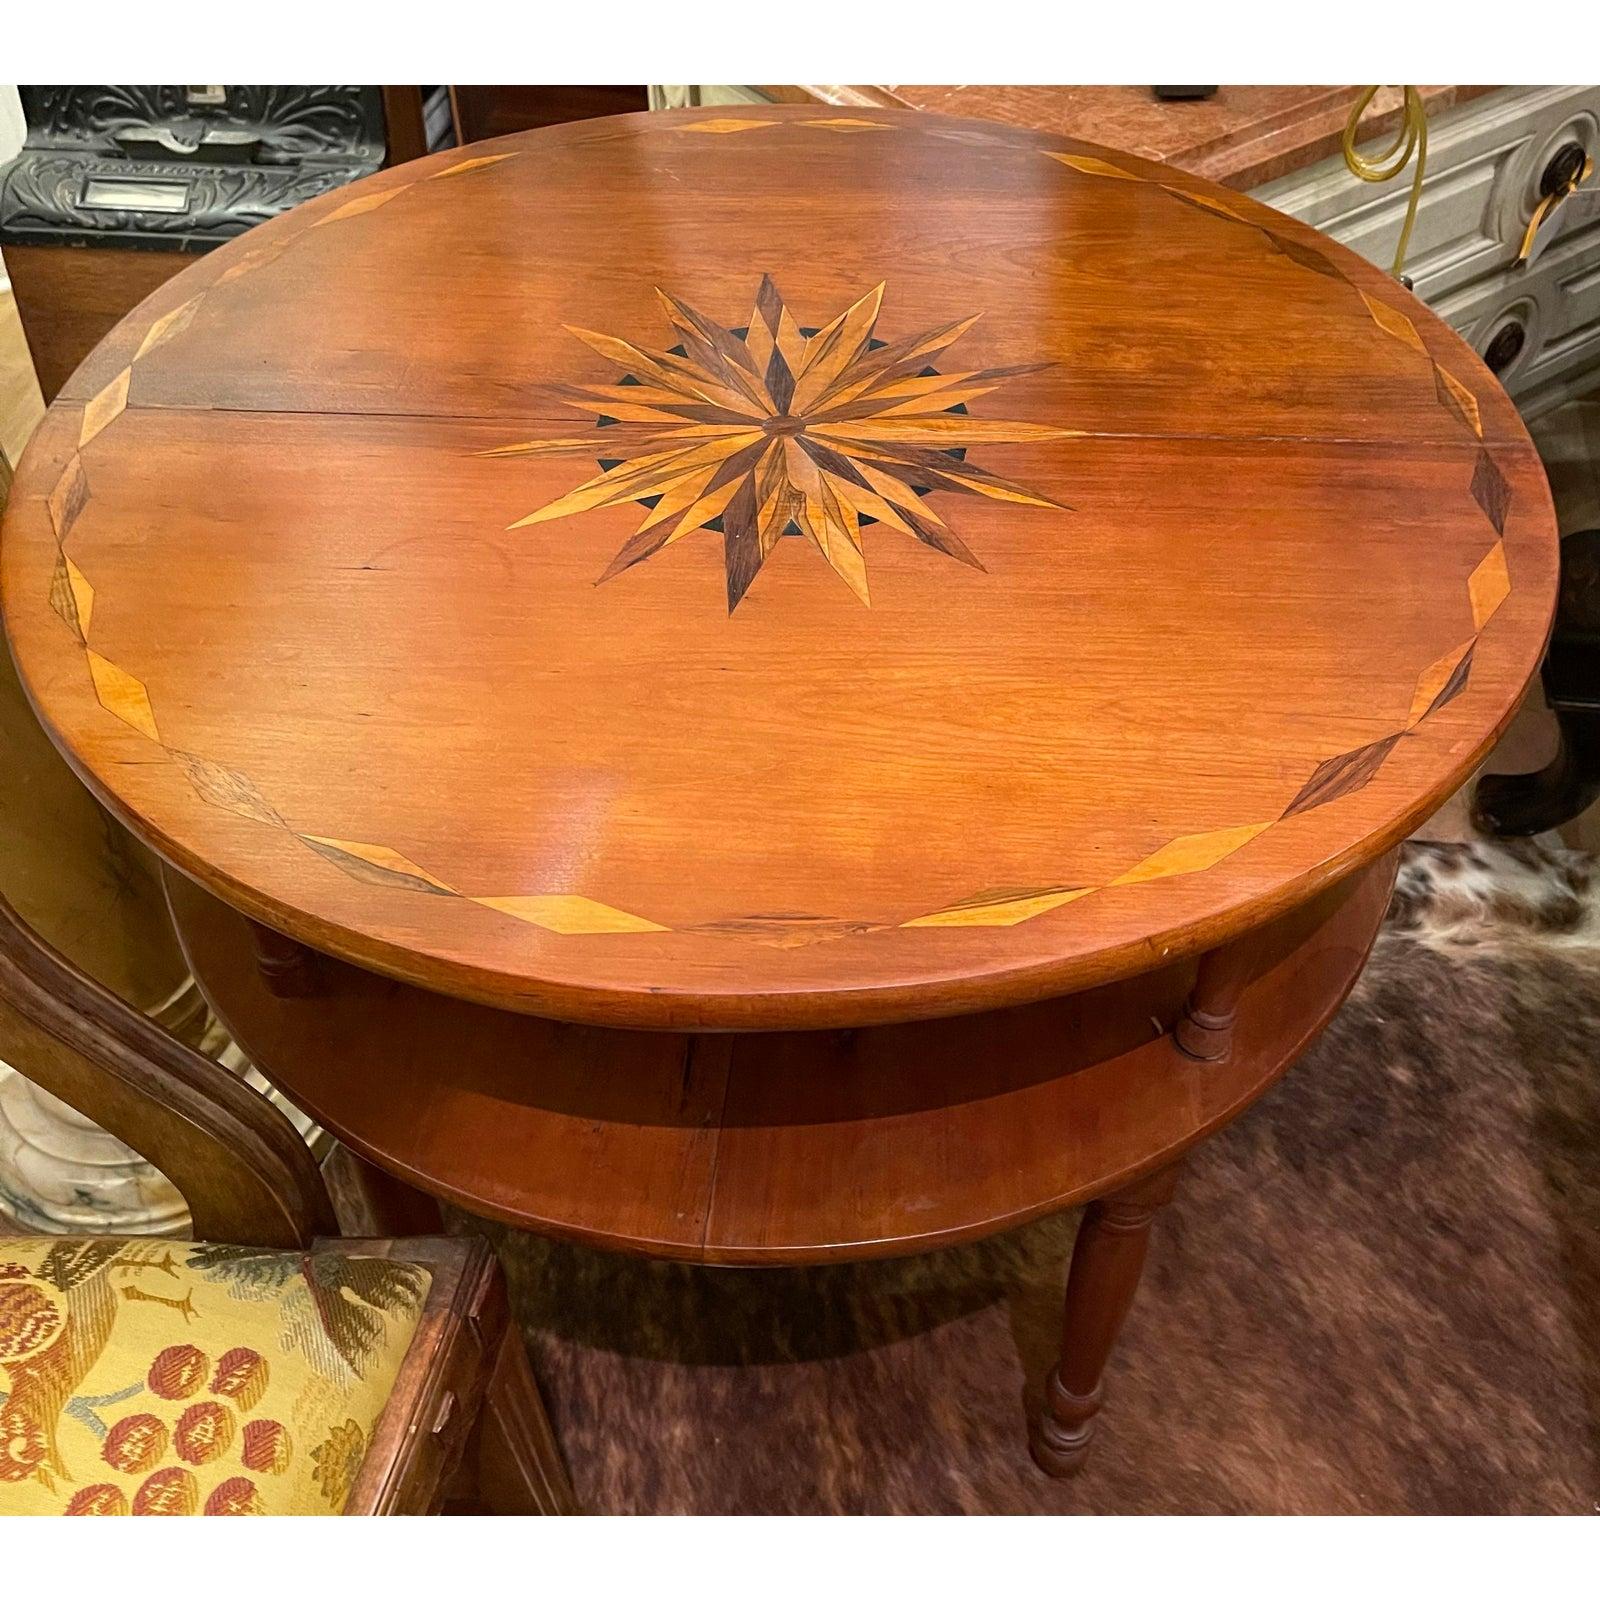 Antique Early 19th Century American Sheraton Inlaid Cherry Table For Sale 1